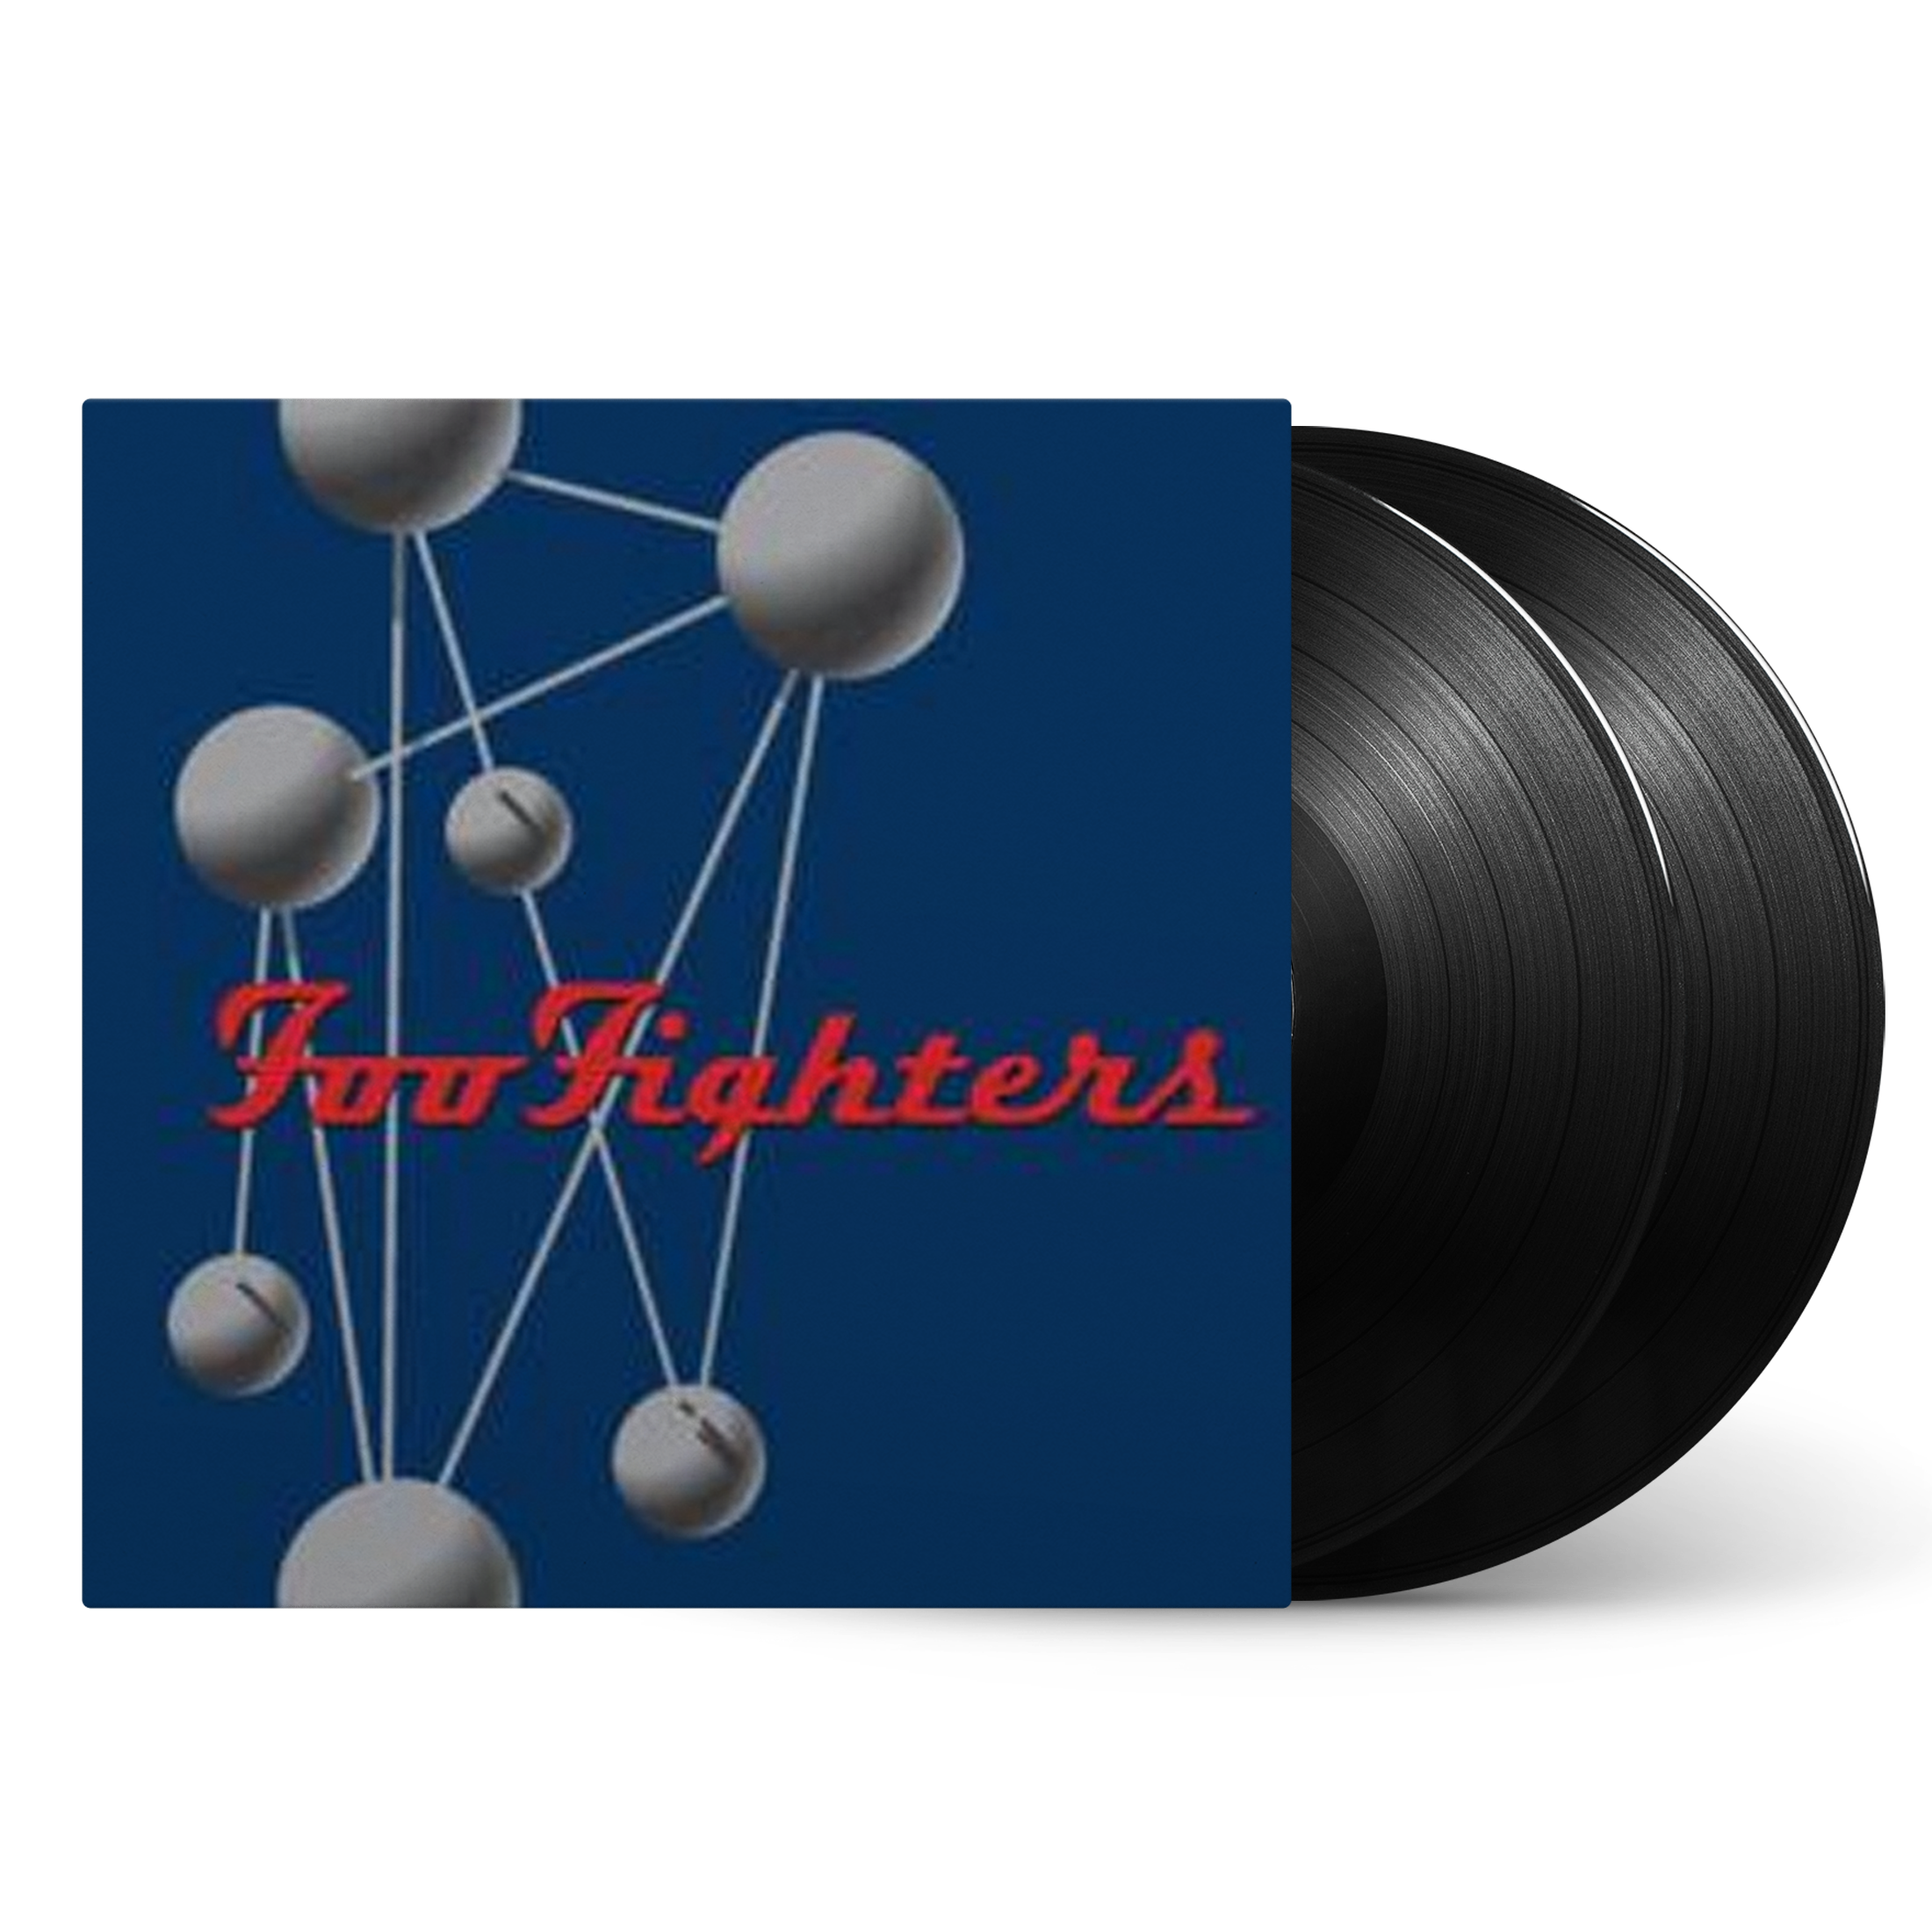 Foo Fighters - The Colour And The Shape: Vinyl 2LP